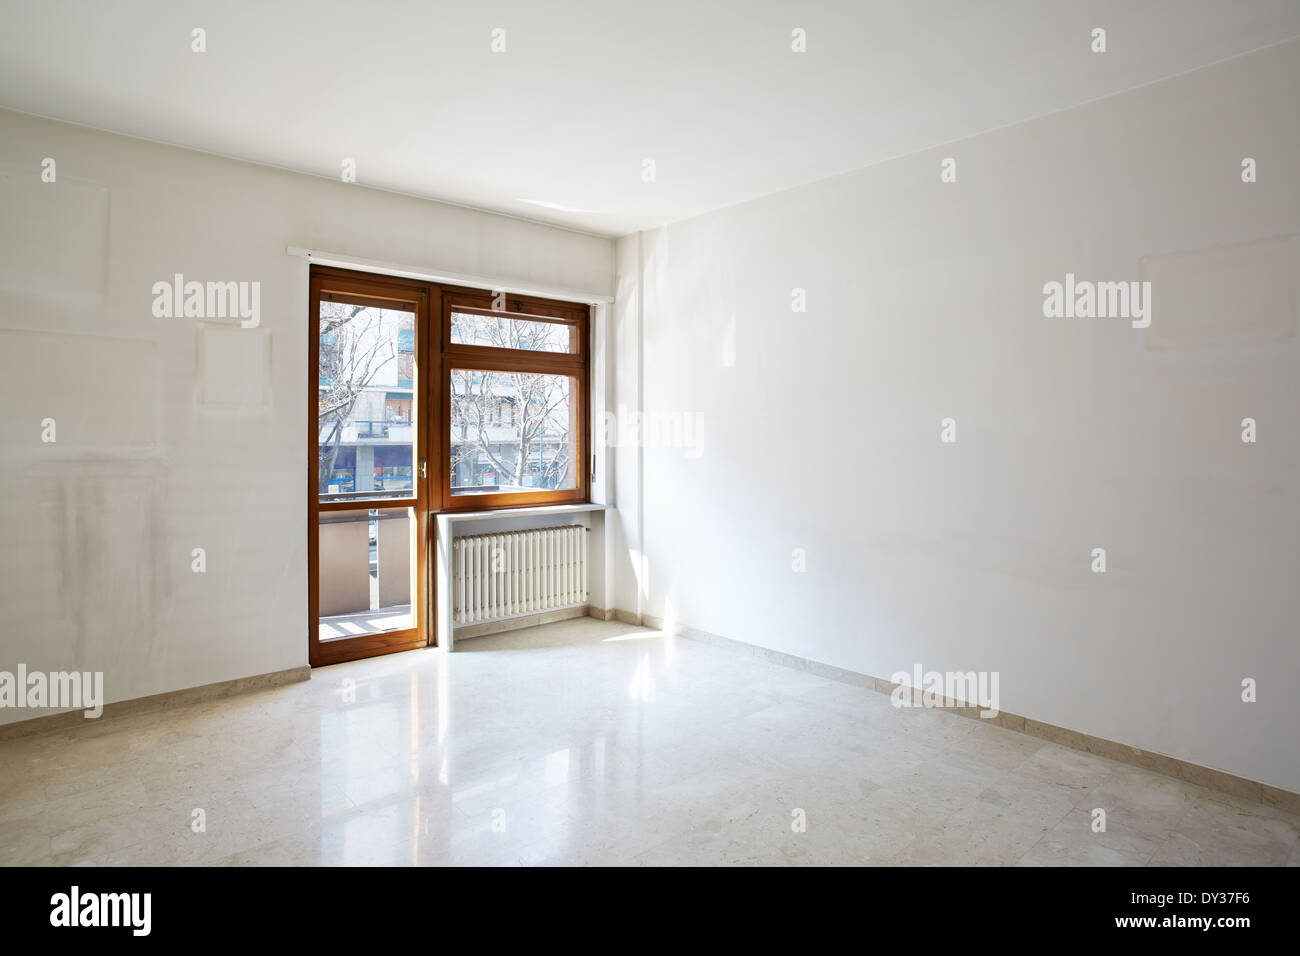 Room with marble floor in empty apartment Stock Photo